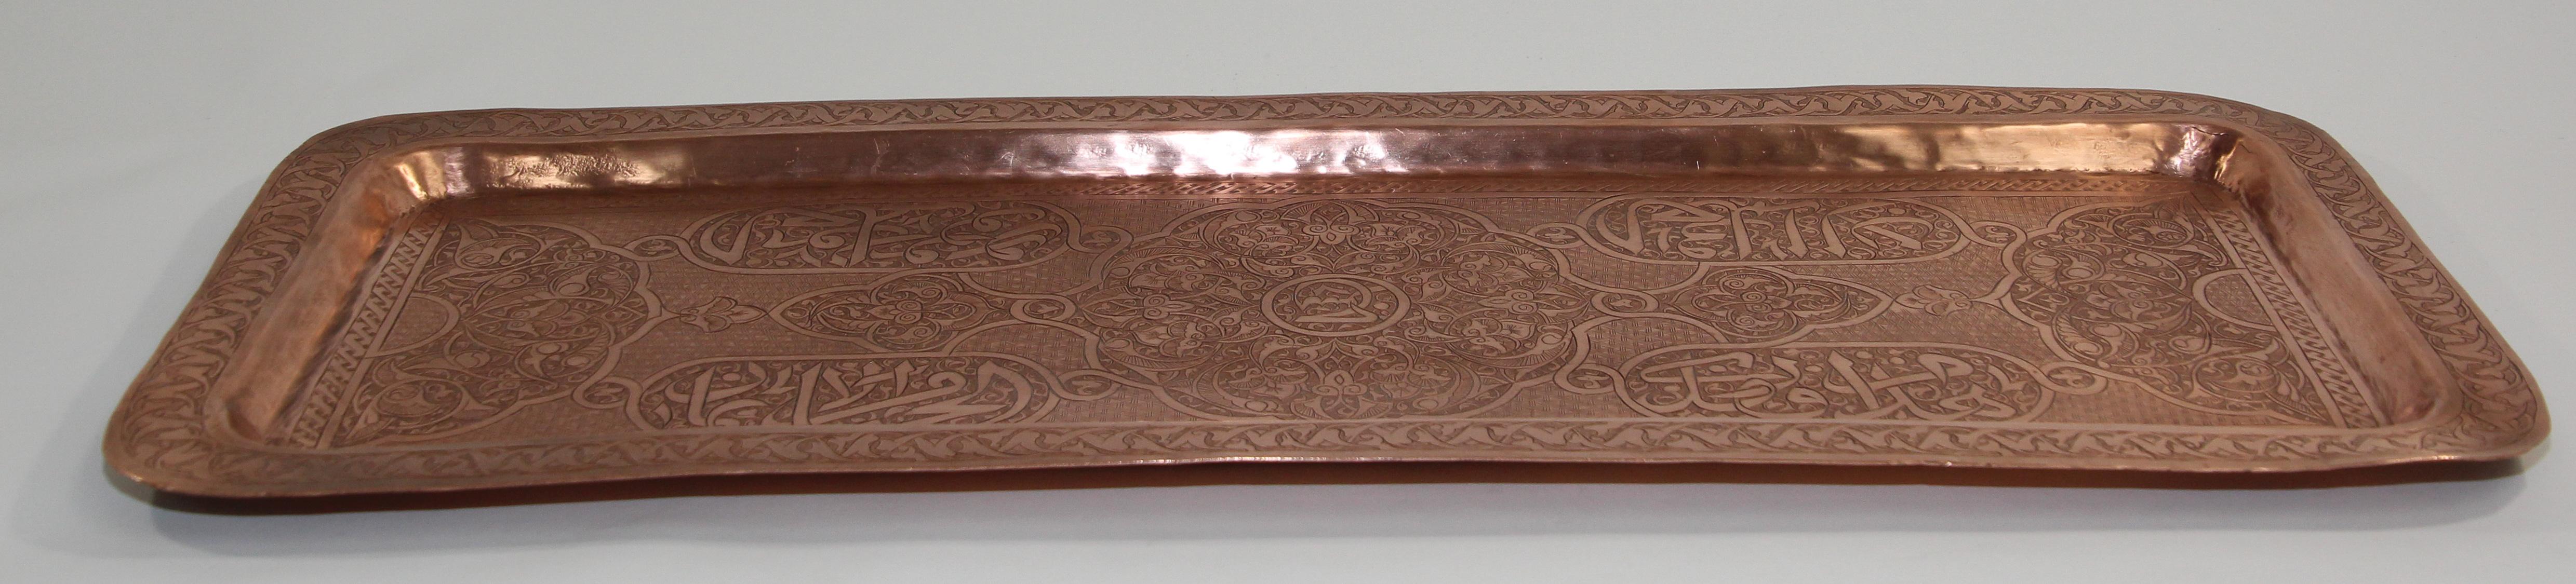 Antique Indo Persian Copper Charger Serving Tray For Sale 5